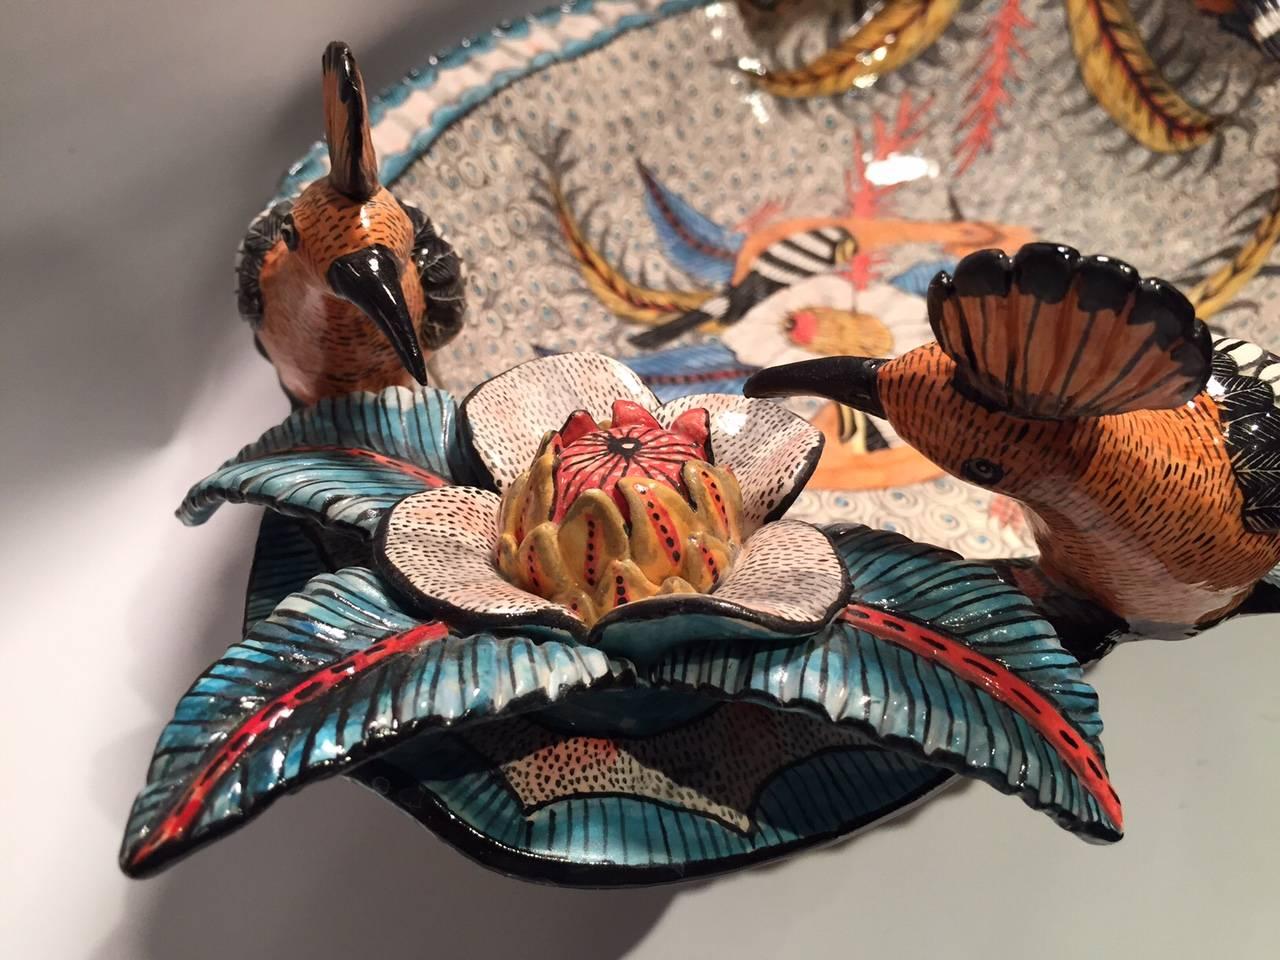 Hoopoe dish AAA, ceramic sculpture by Ardmore from South Africa. Sculpted by Octavia Mazibuko, painted by Thembi Kikala measures 24